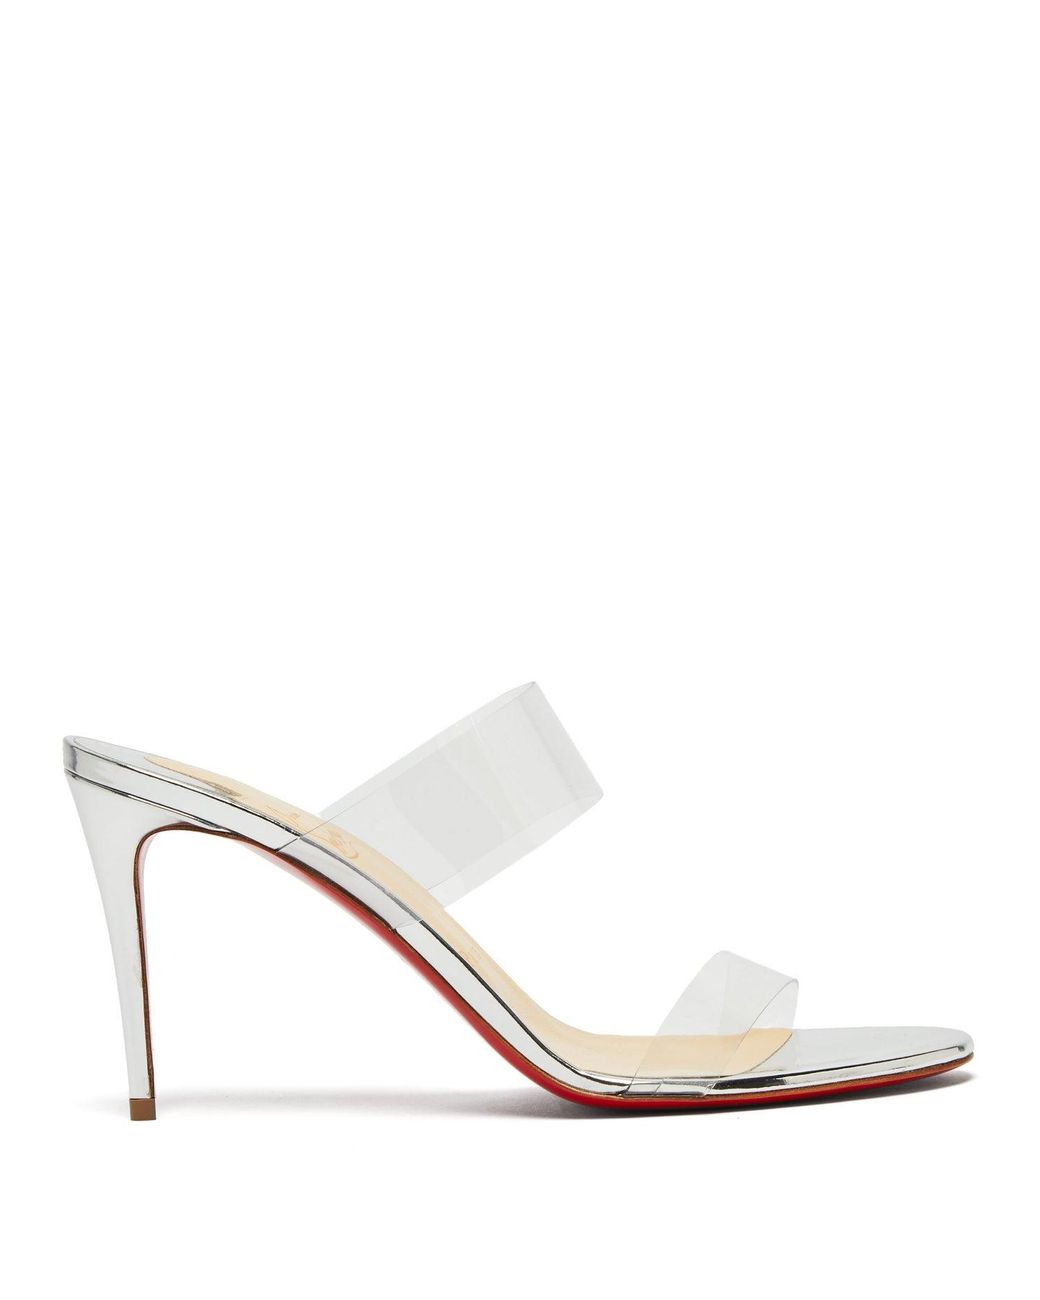 Christian Louboutin Just Nothing 85 Plexi-strap Leather Sandals in ...